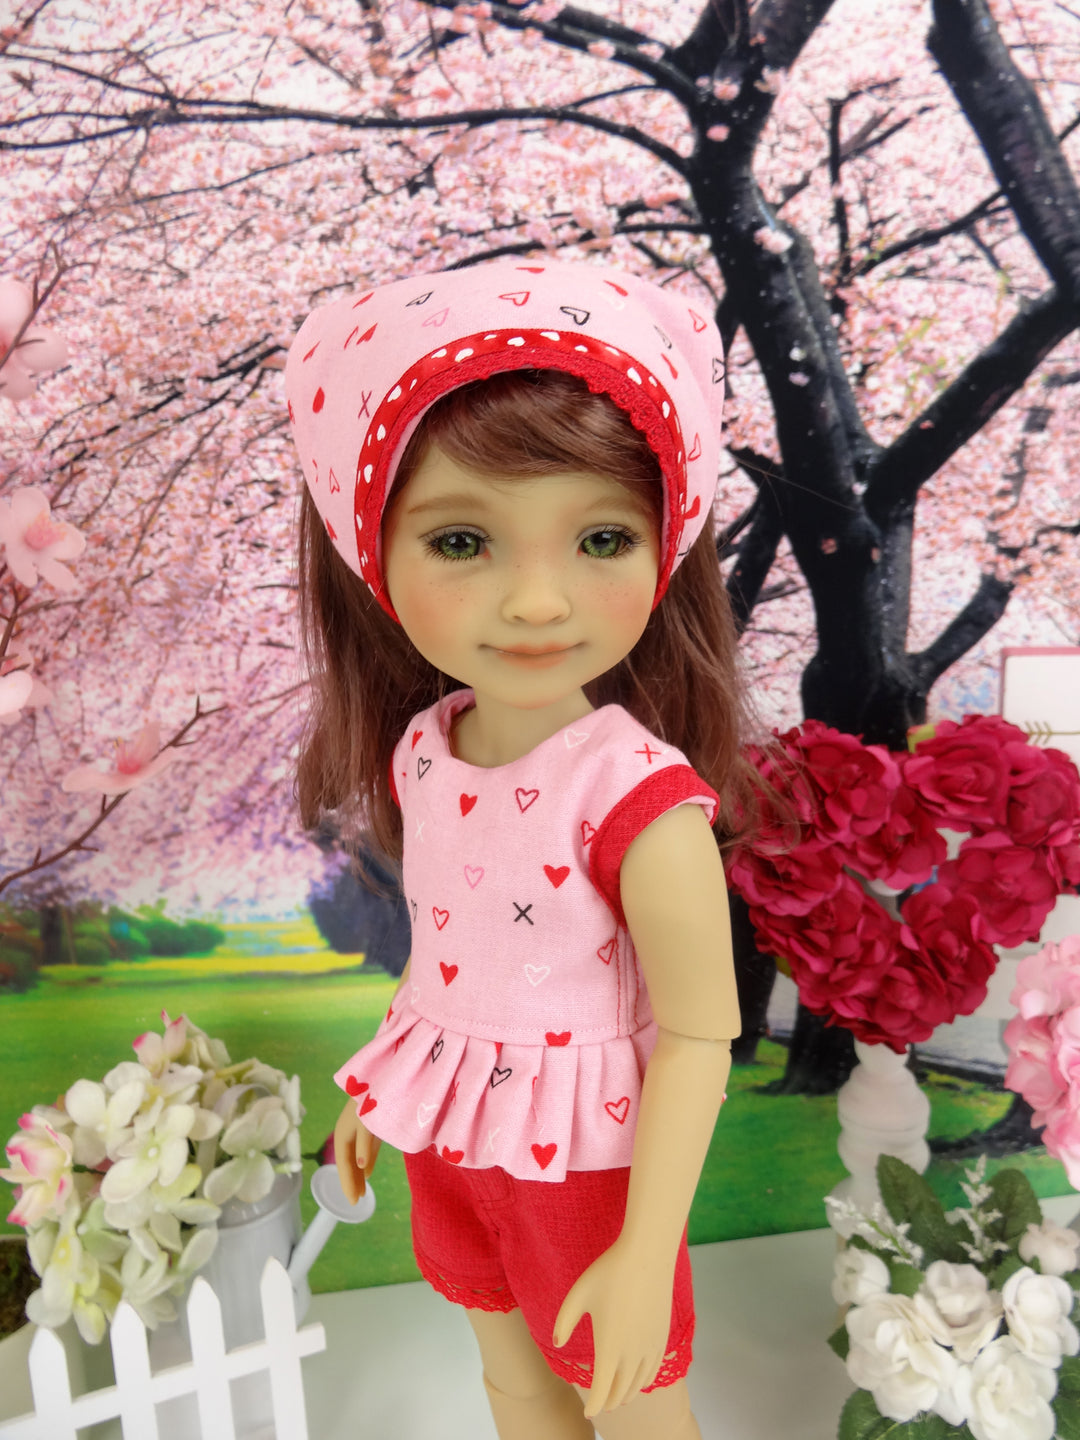 Hugs & Love - top & shorts with shoes for Ruby Red Fashion Friends doll